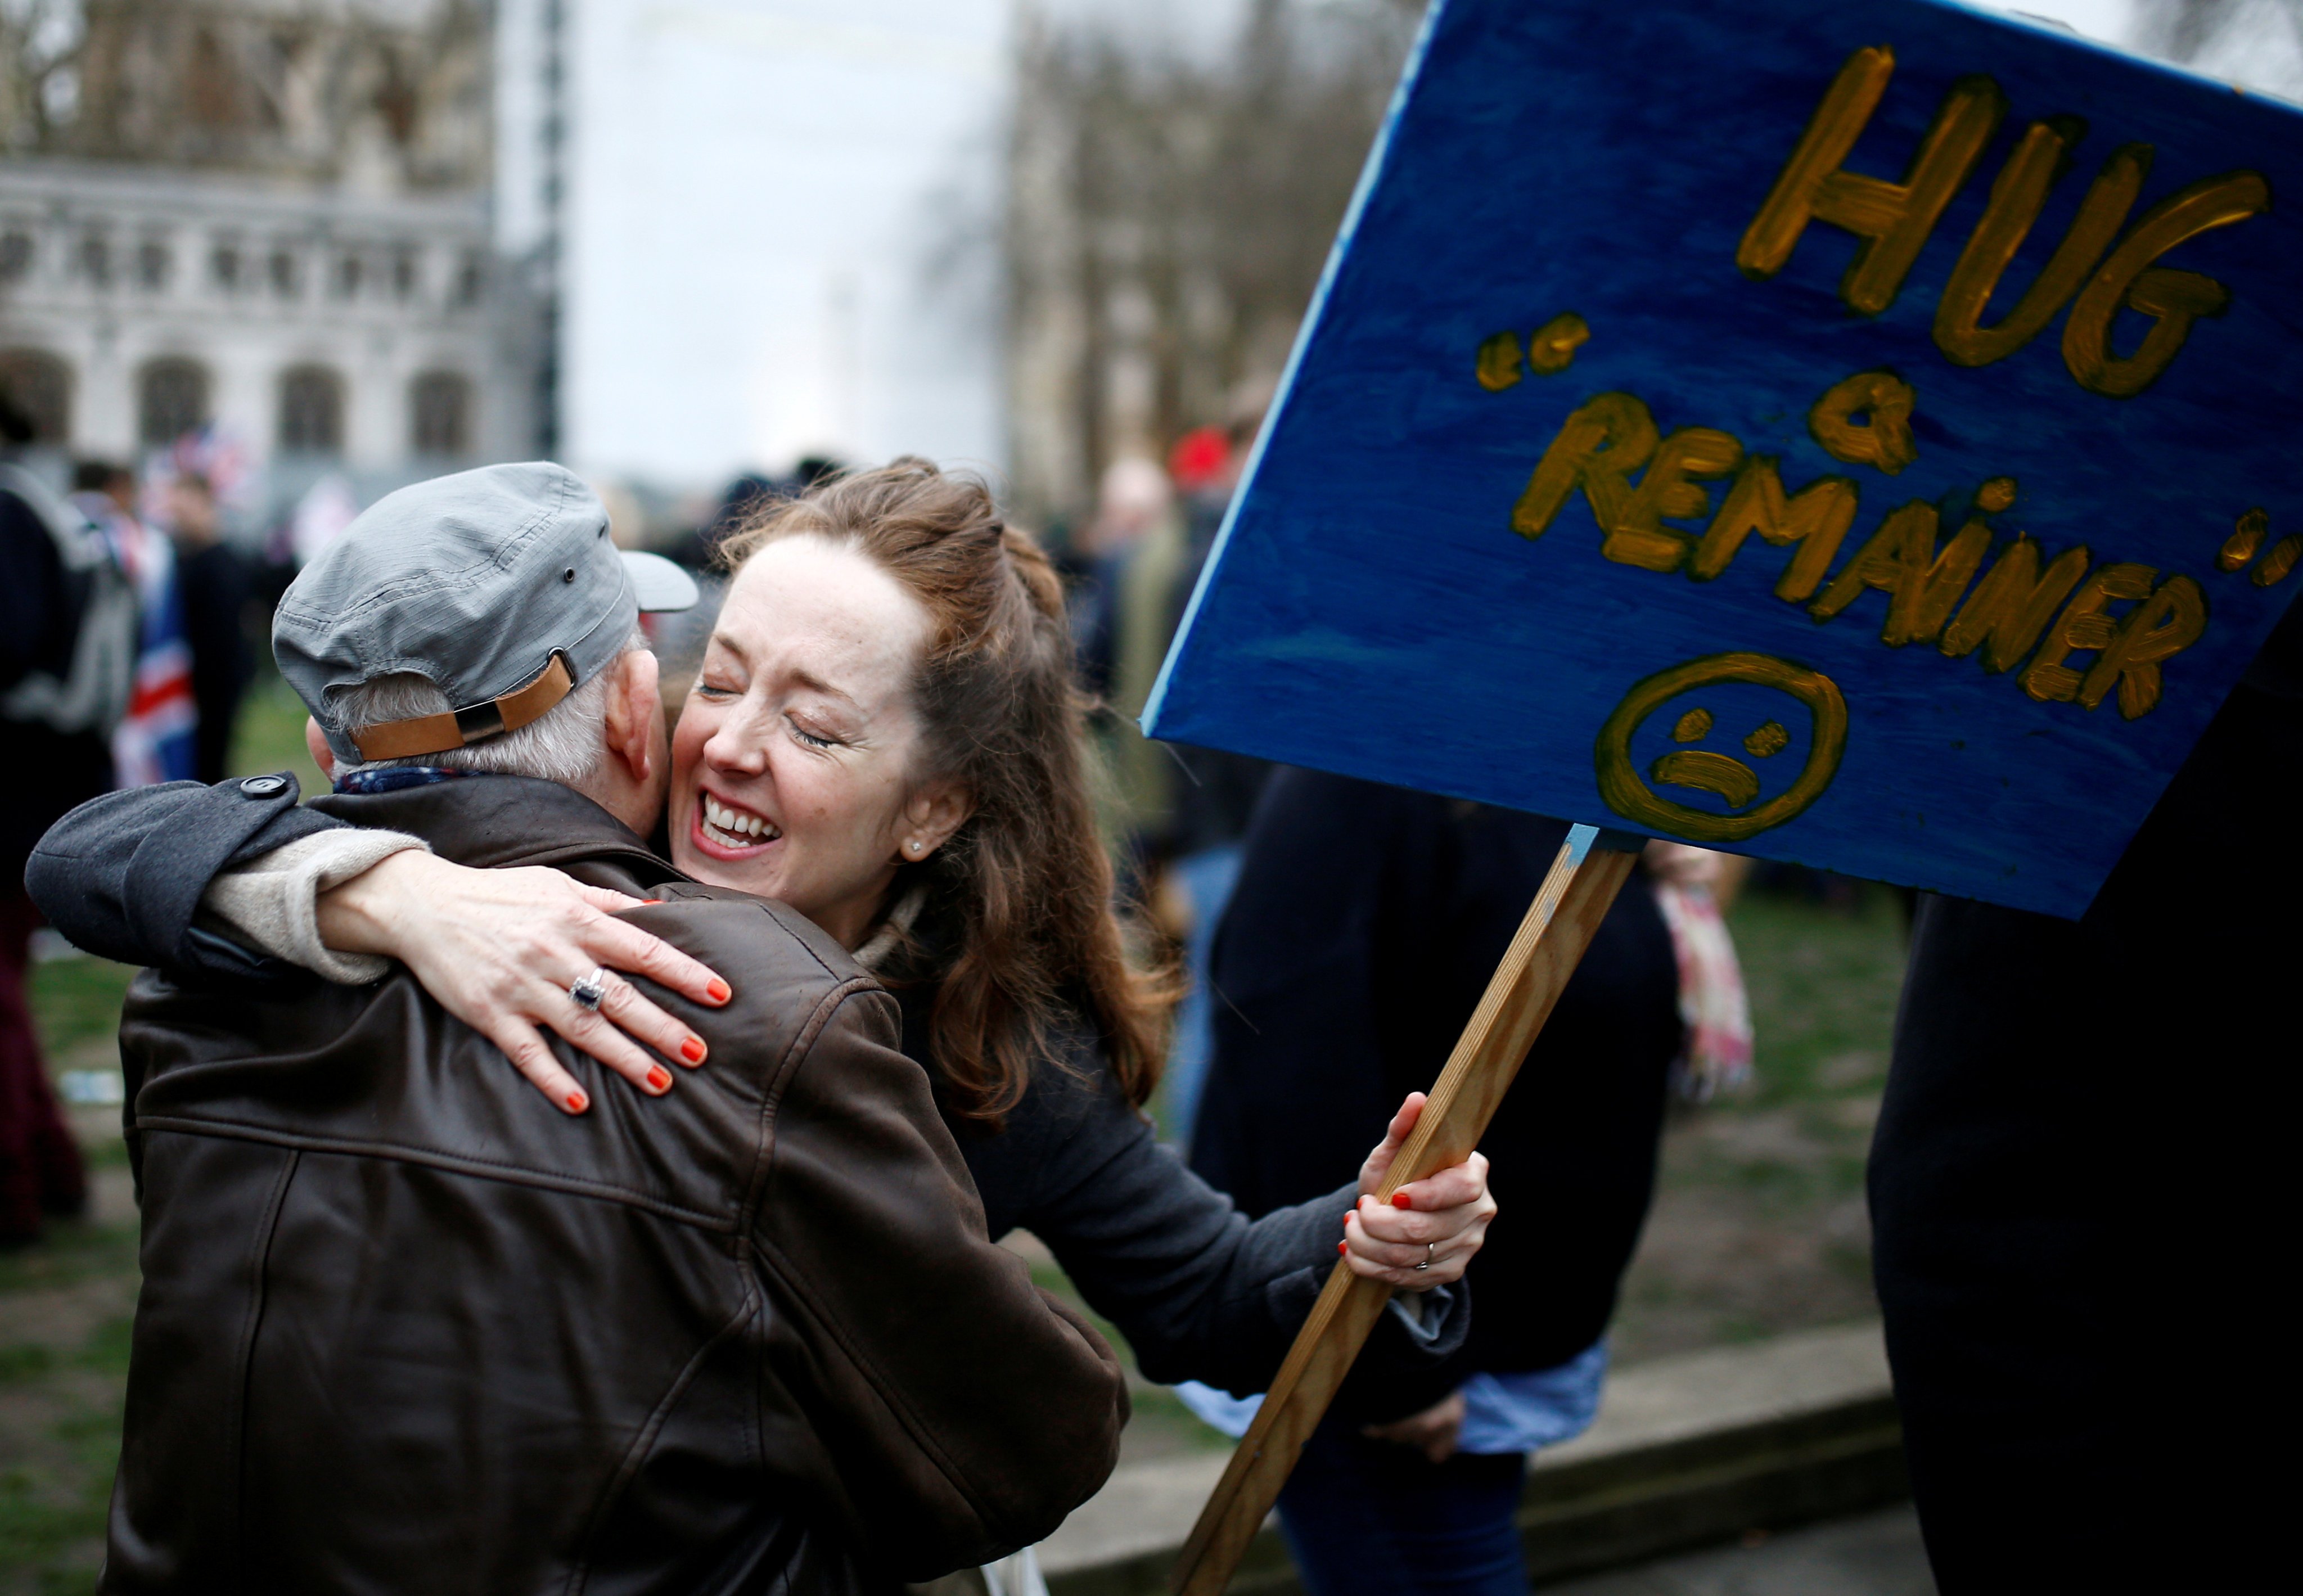 An anti-Brexit protester hugs a man while holding a placard on Brexit day in London, Britain, on January 31, 2020. Photo: Reuters